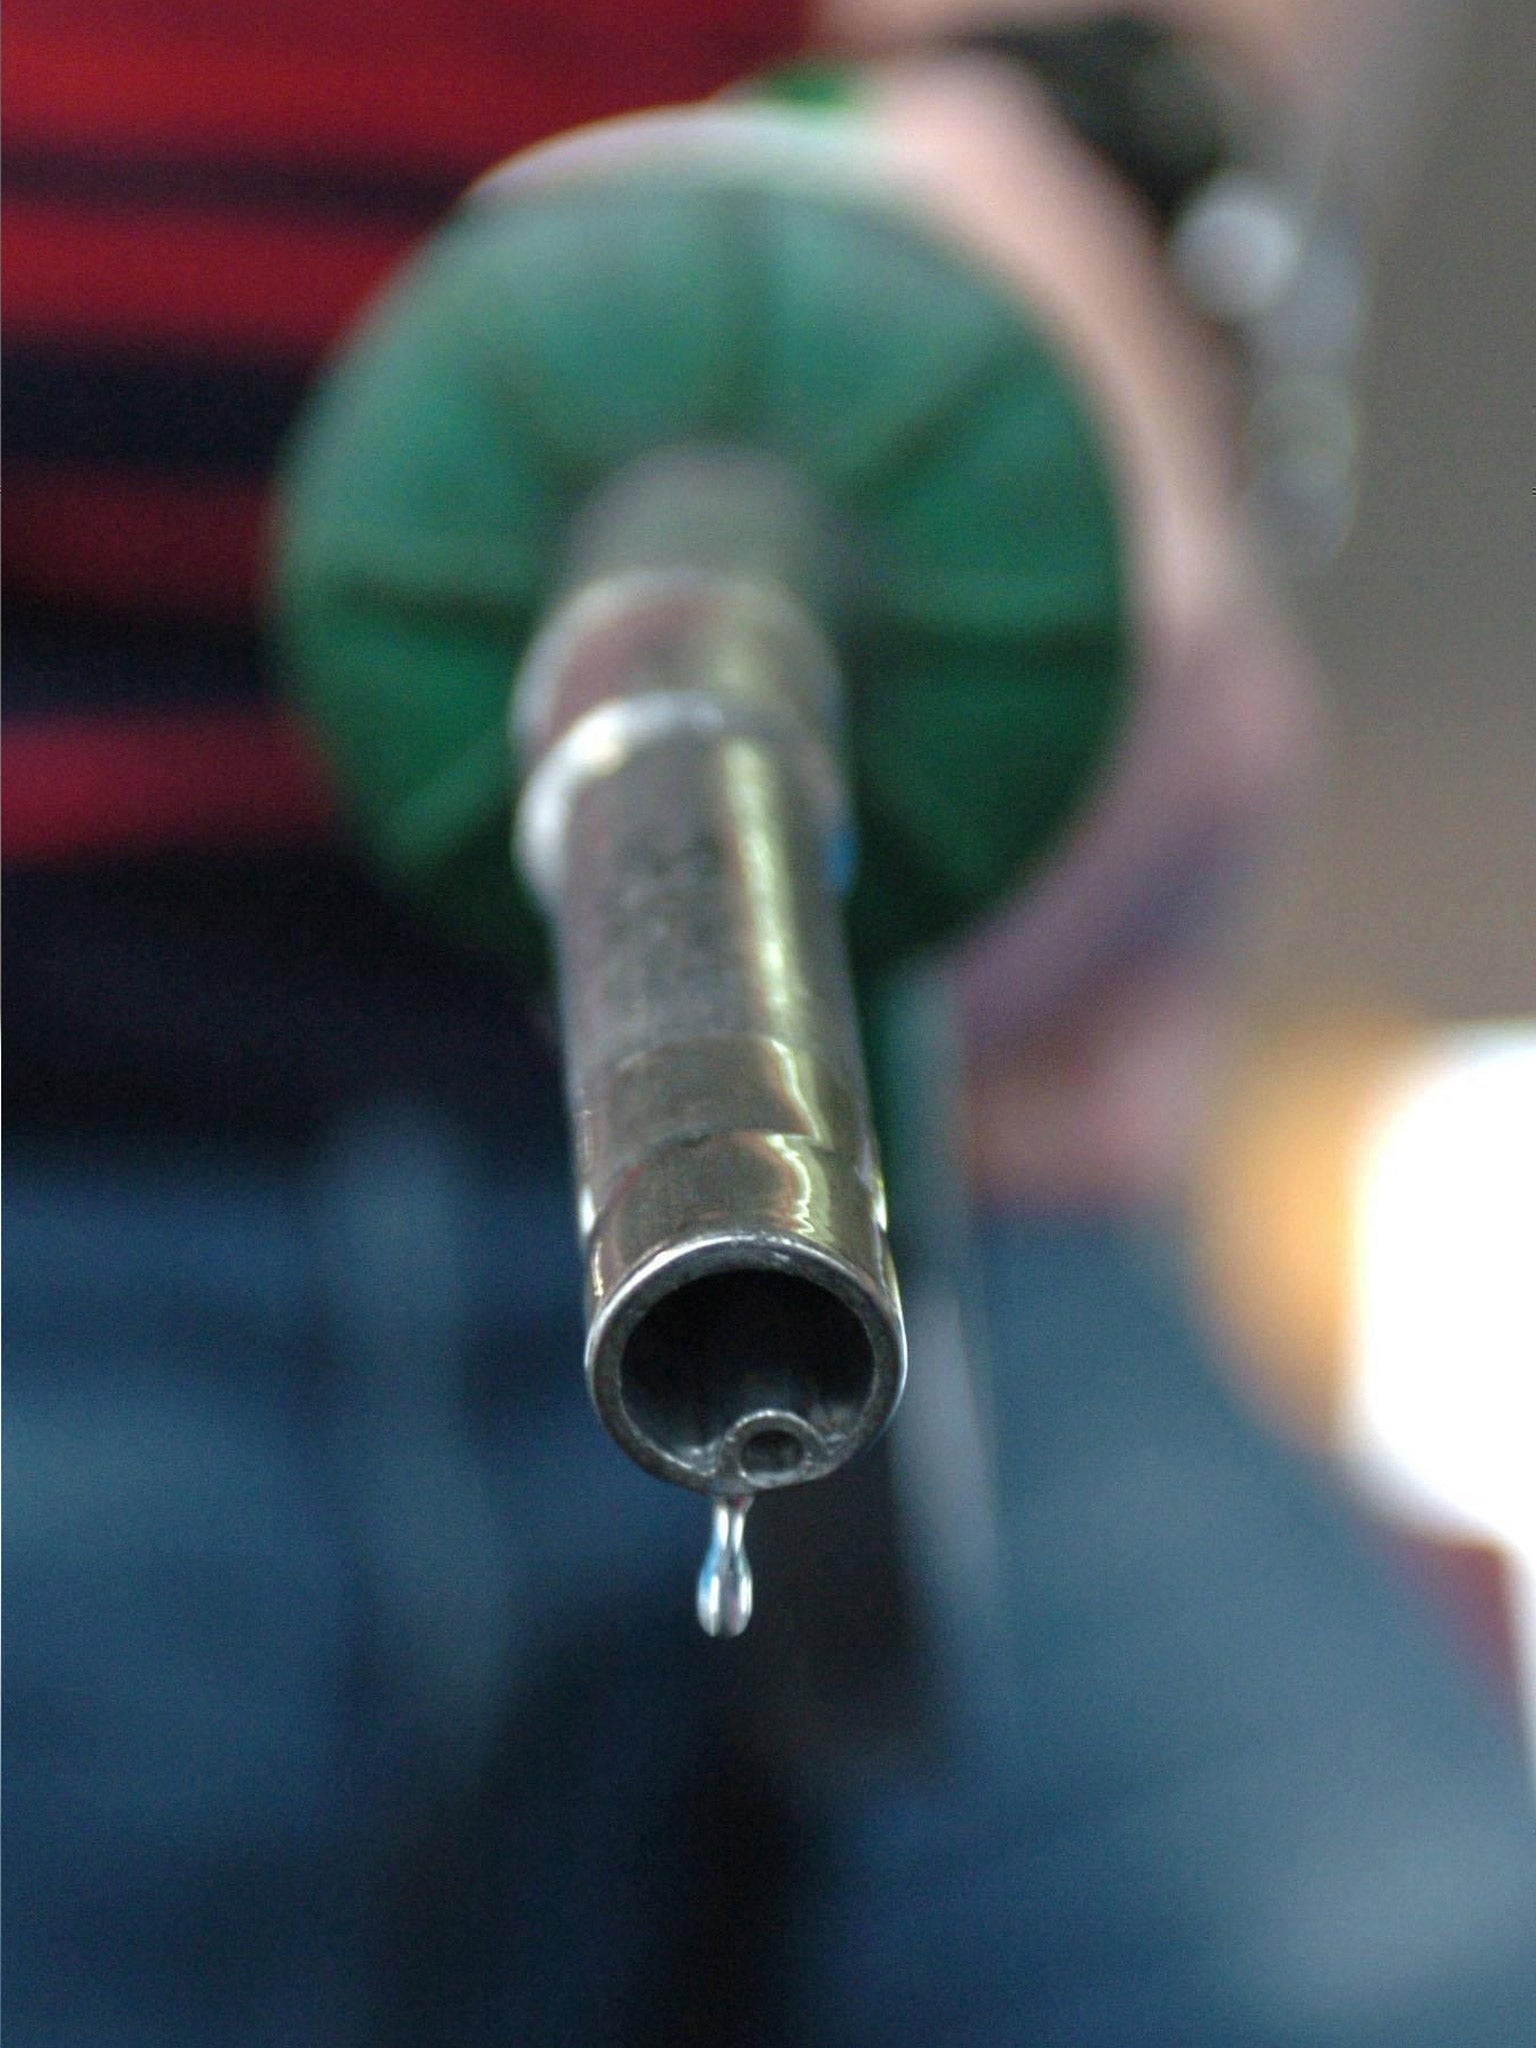 The coldest March for 50 years contributed to petrol sales falling to a new monthly low